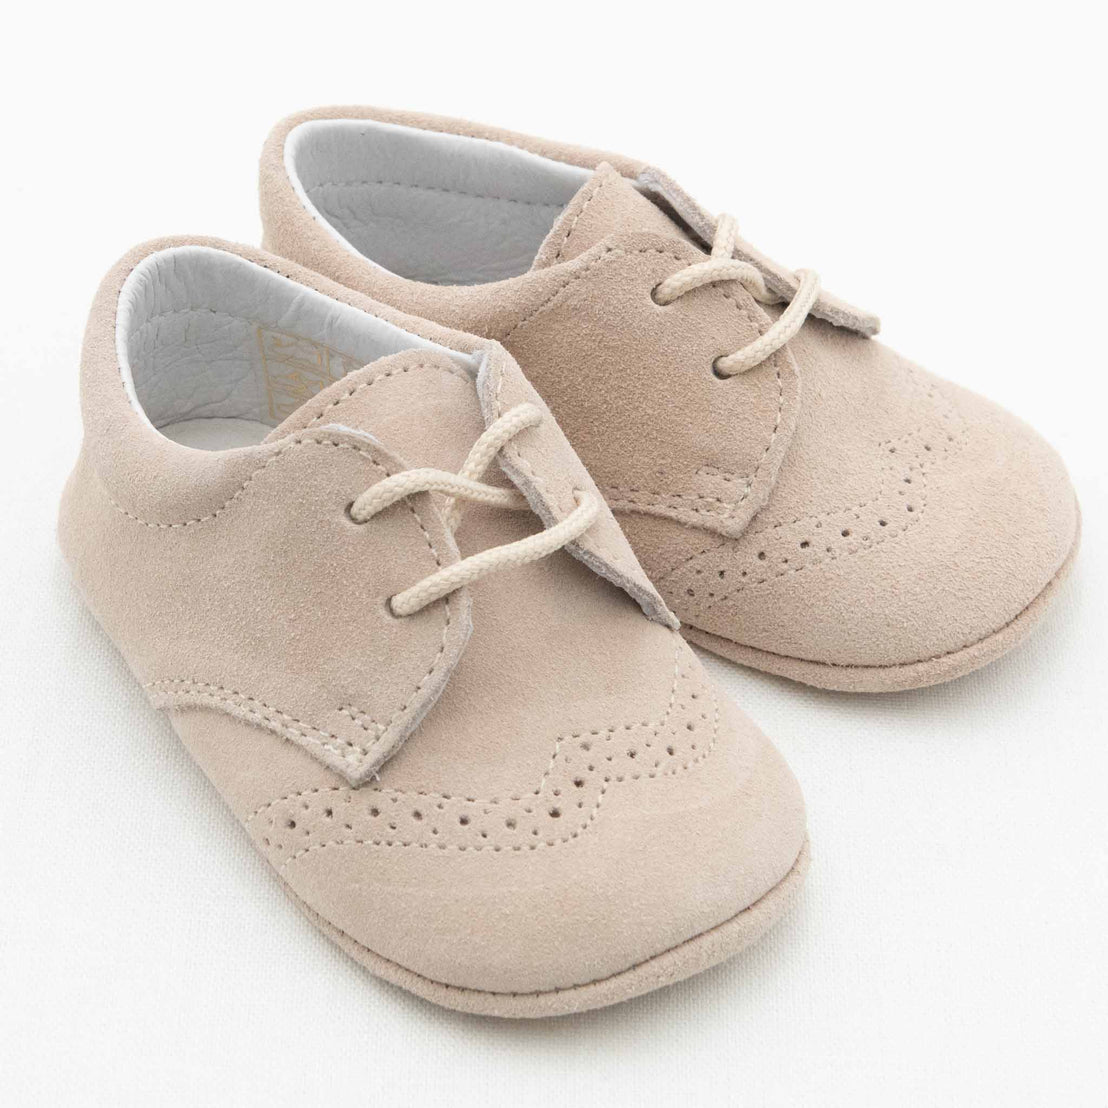 A pair of Camel Suede Shoes from Baby Beau & Belle, designed for boys with laces and intricate decorative stitching details. These shoes, with their handcrafted appearance, are made from a soft suede-like material and are set against a plain white background.